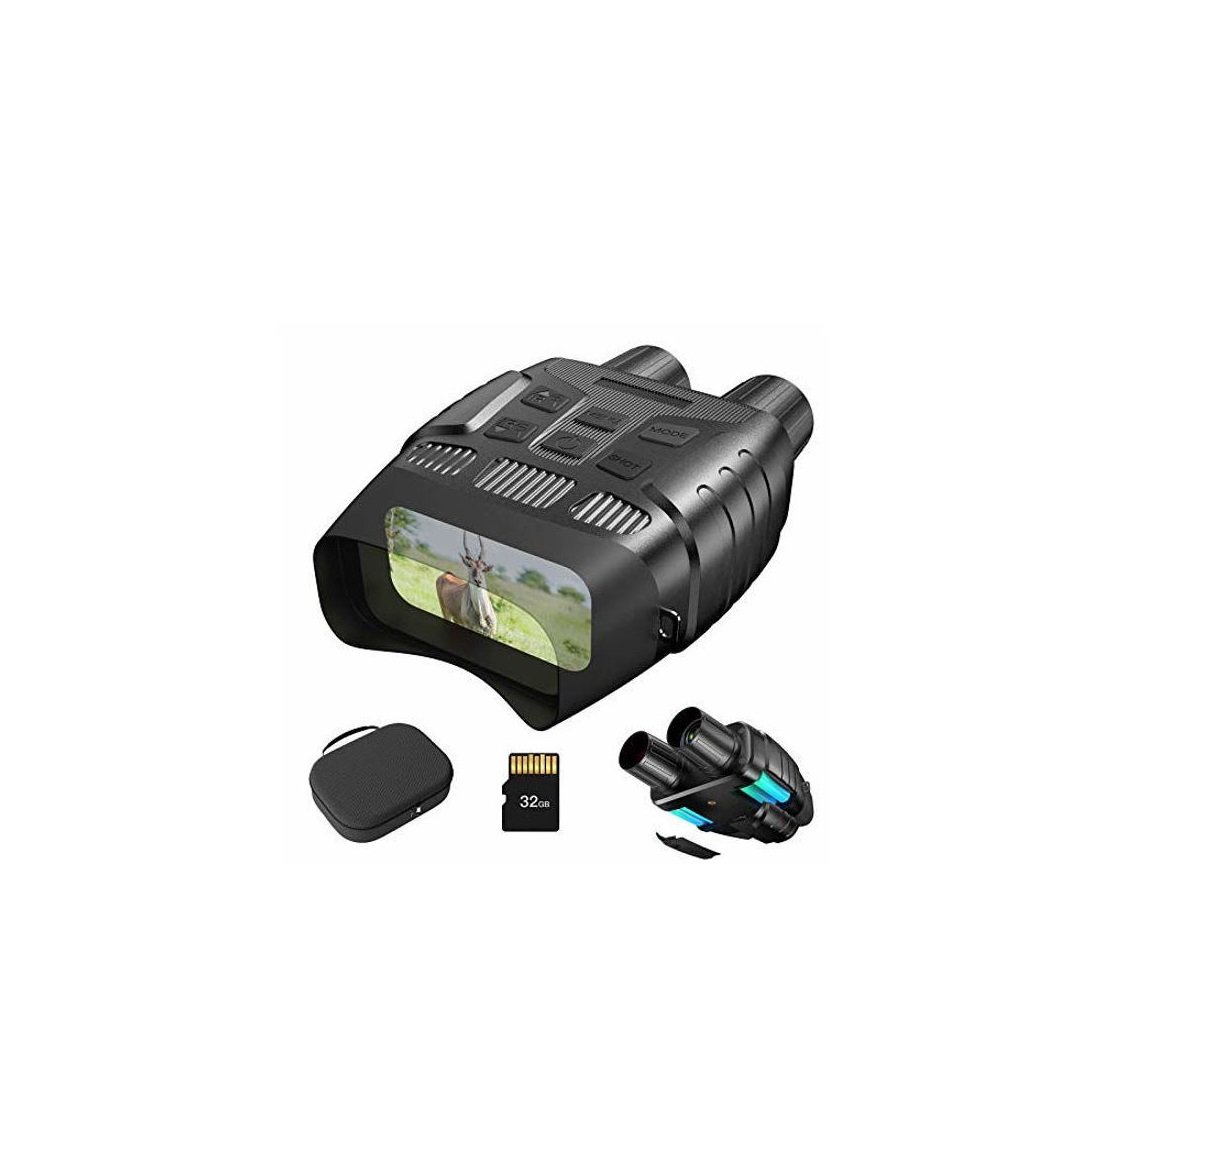 JSTOON Nv-3186 Digital Night Vision Goggles Manual - feature image